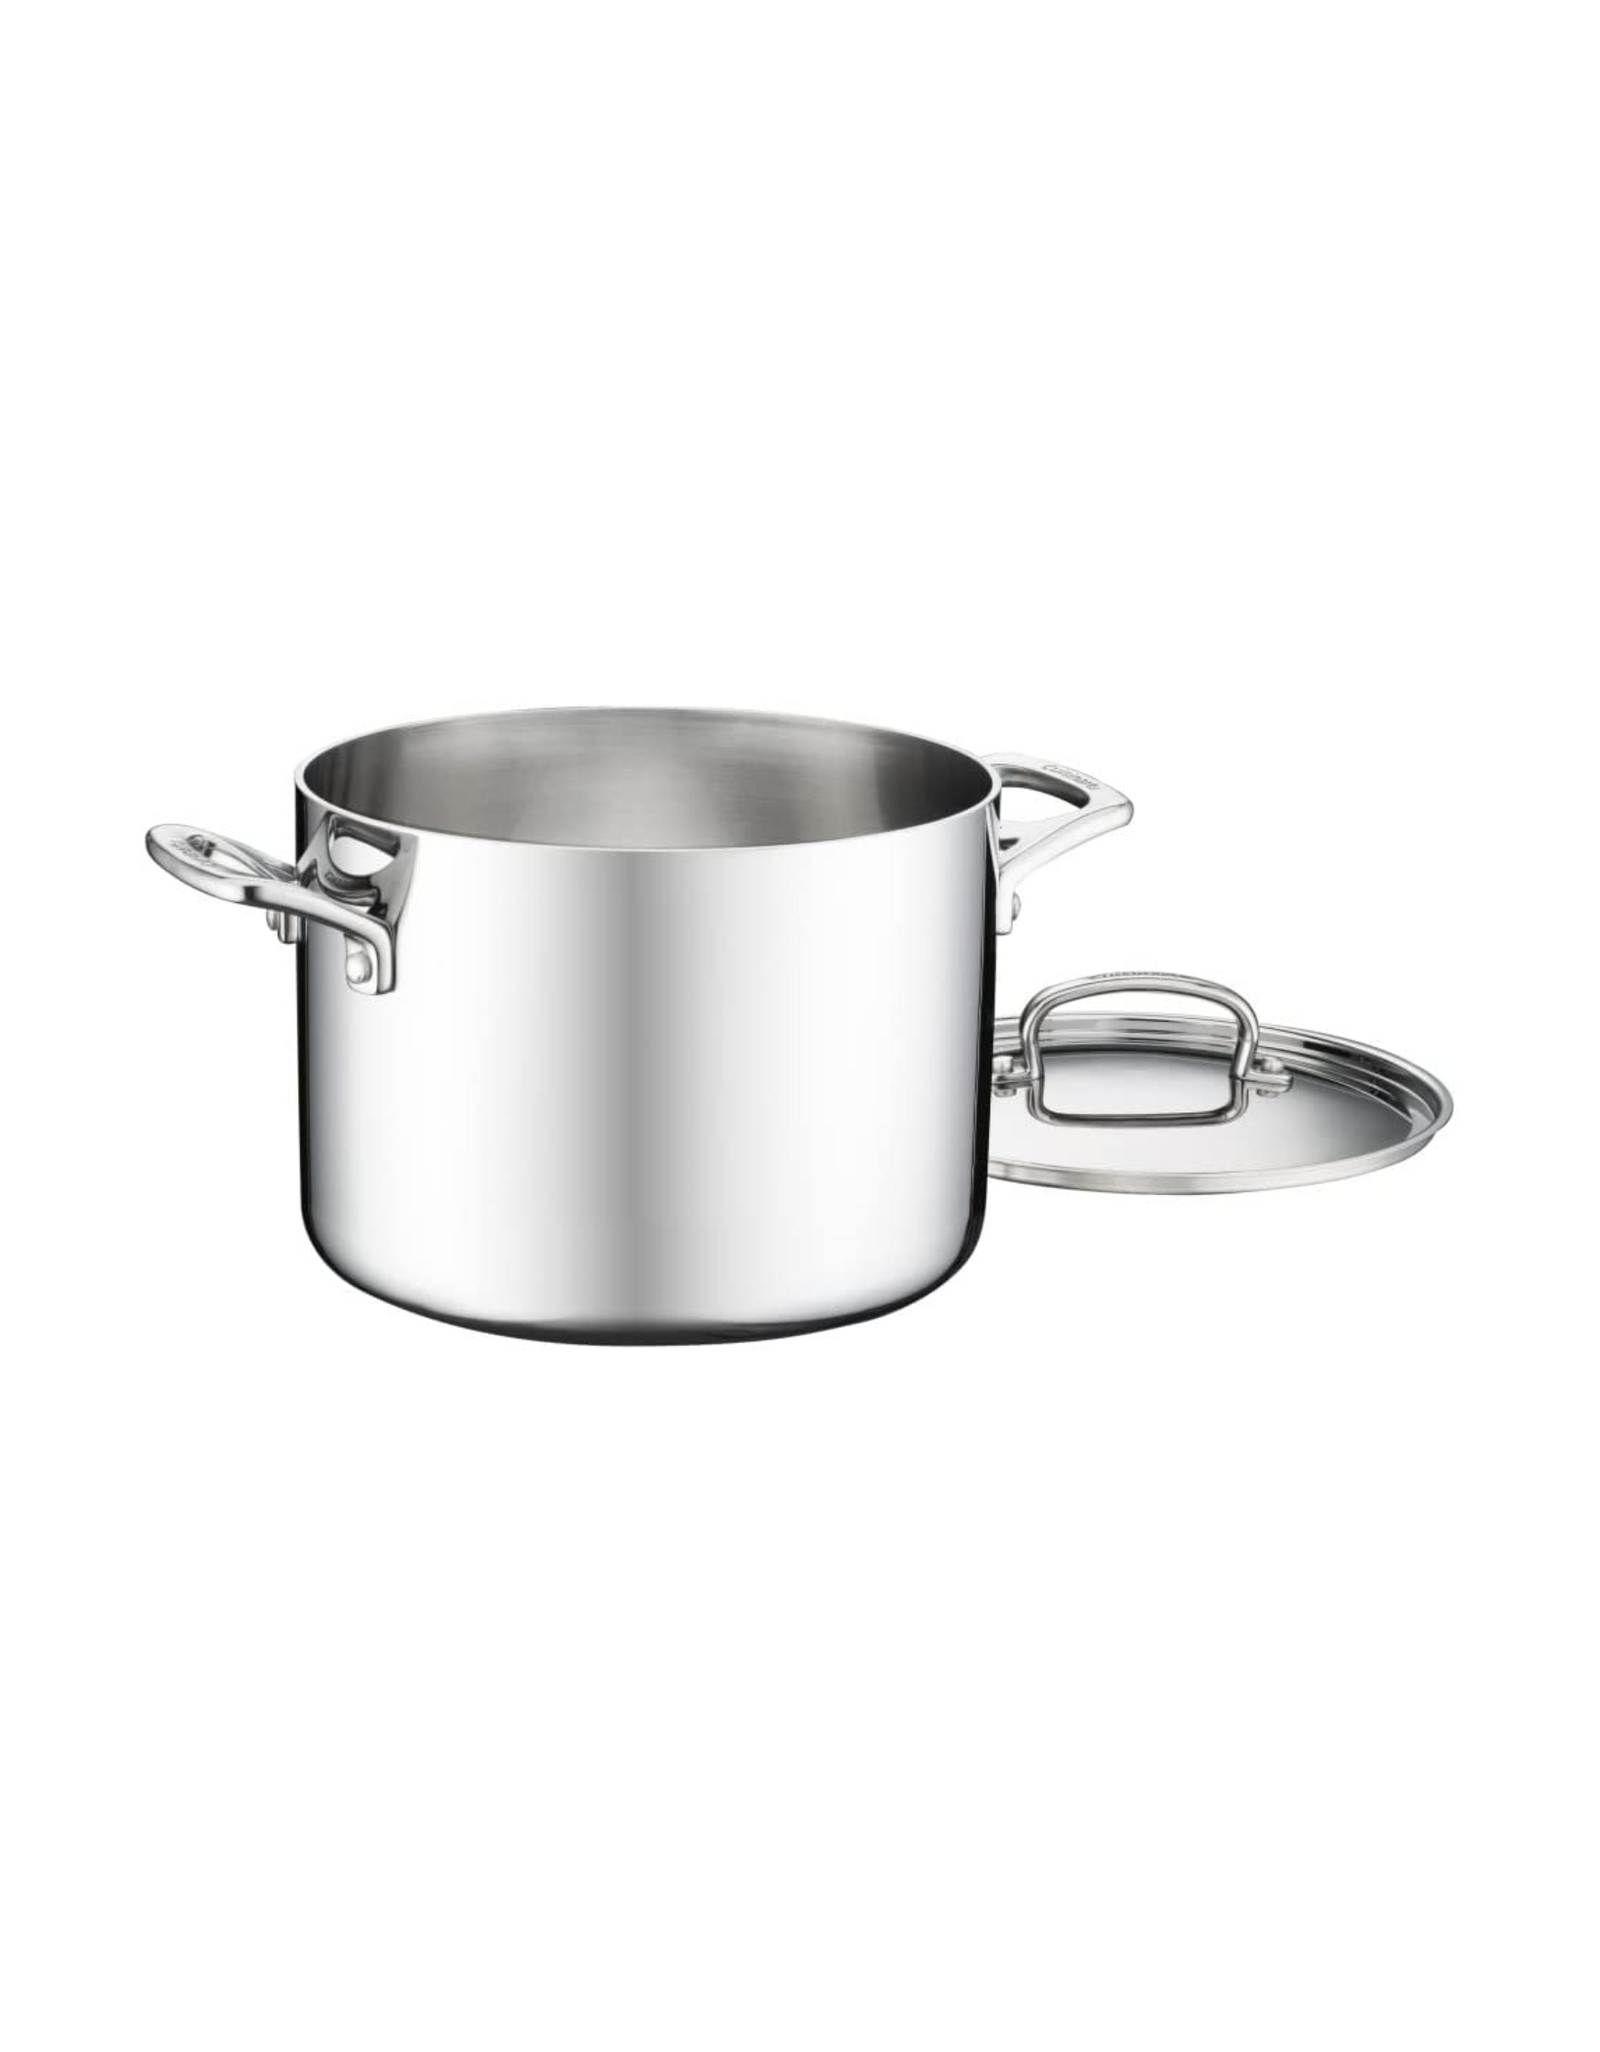 Cuisinart French Classic Tri-Ply Stainless Stockpot with Cover, 6-Qt